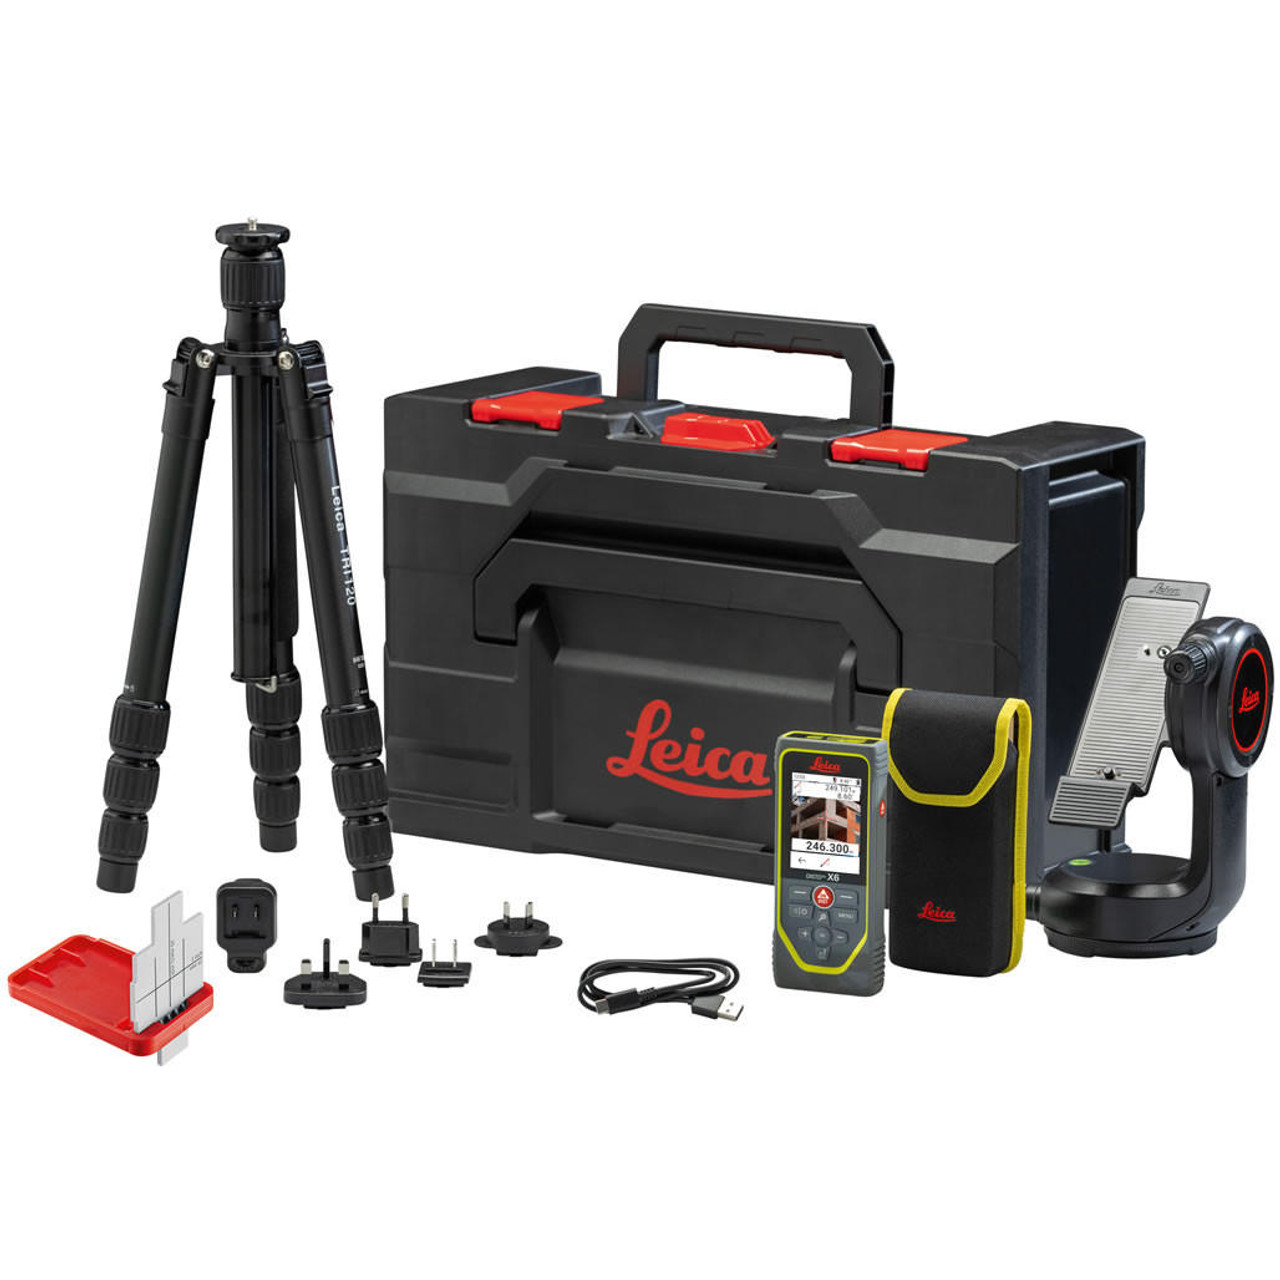 Leica DISTO X6 Laser Distance Meter Point-to-Point Package